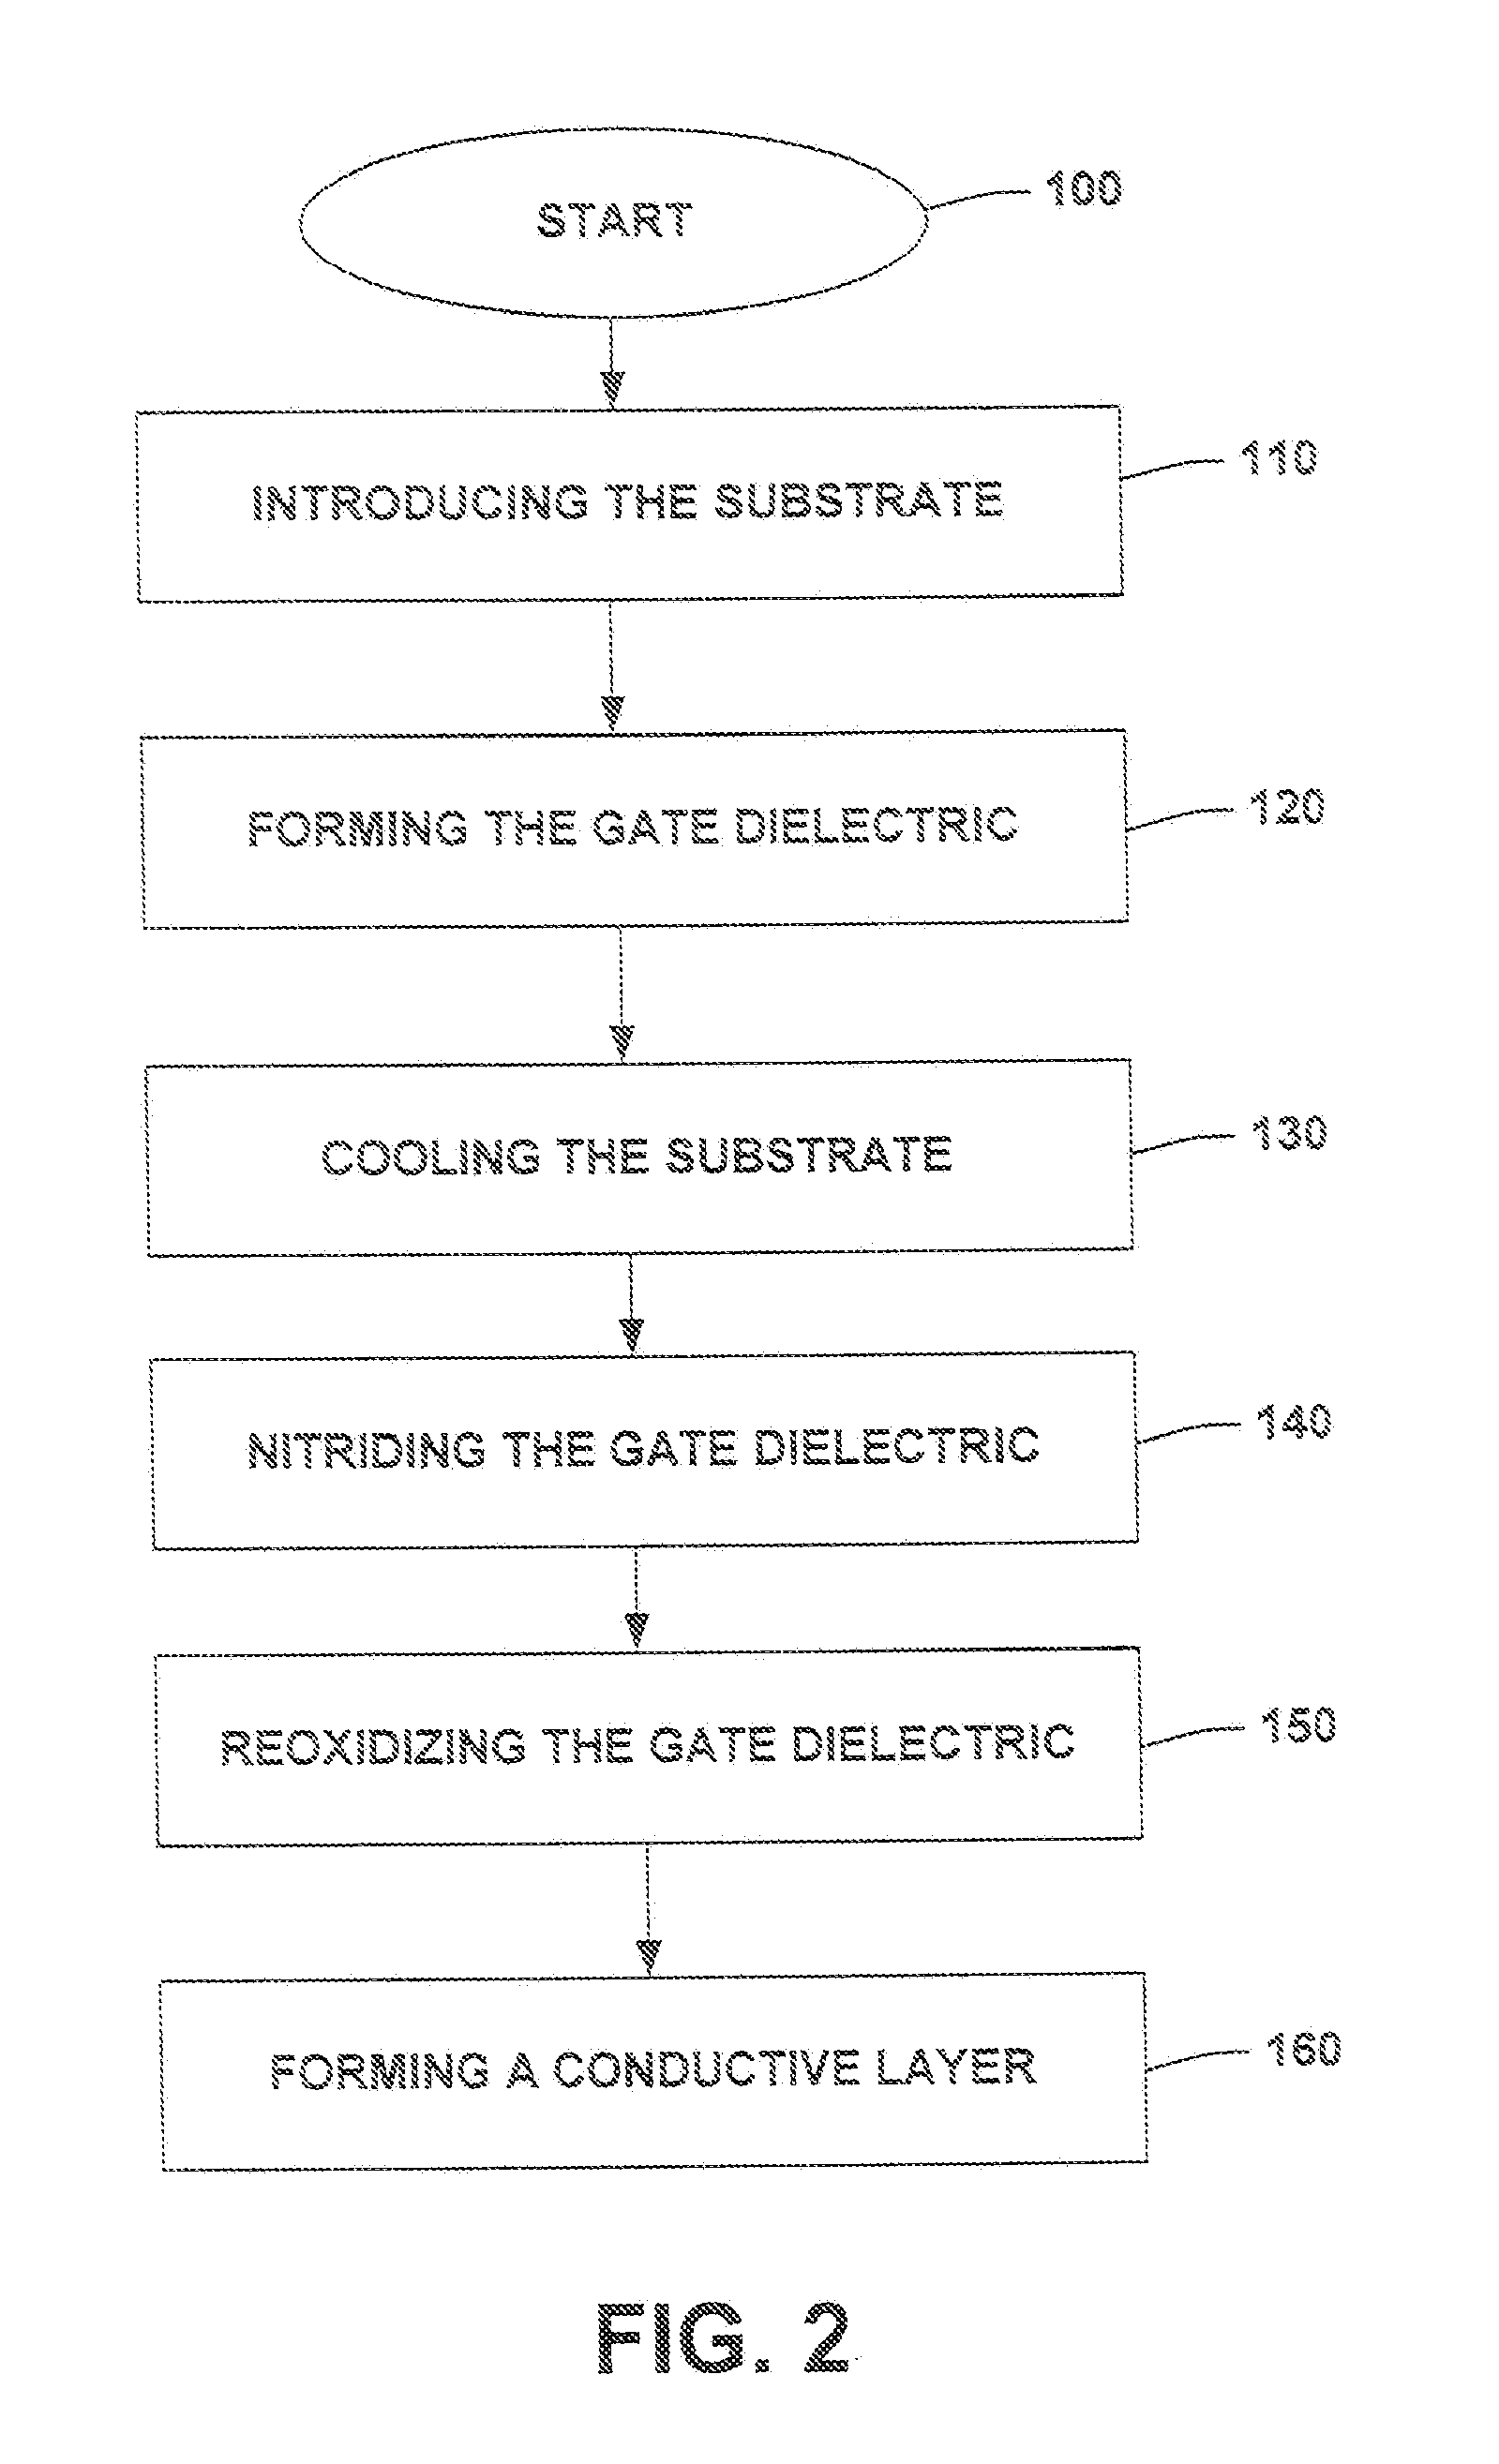 System and Method for Mitigating Oxide Growth in a Gate Dielectric